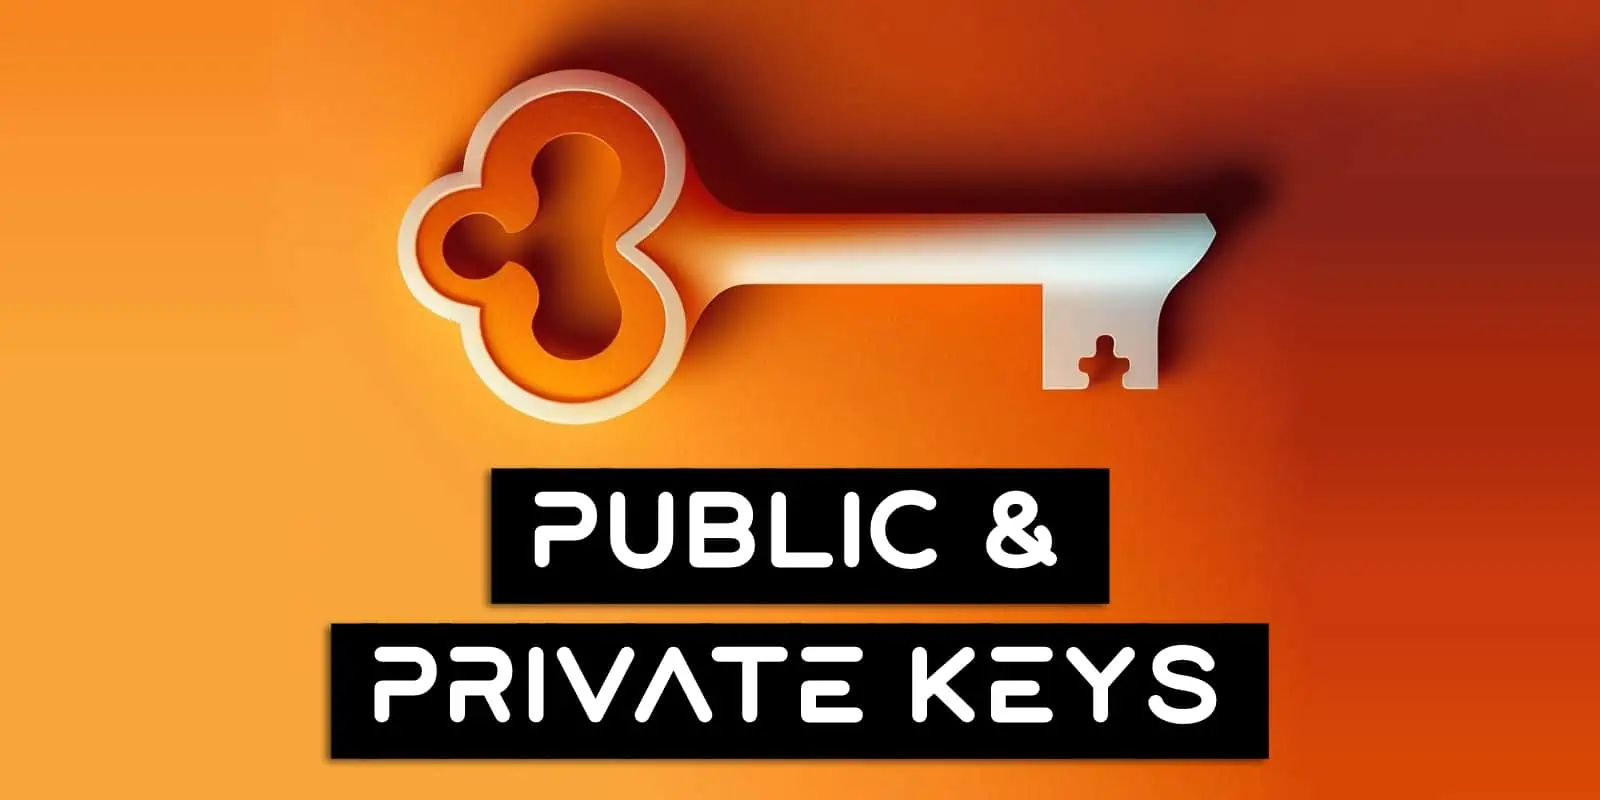 What Are Public And Private Keys